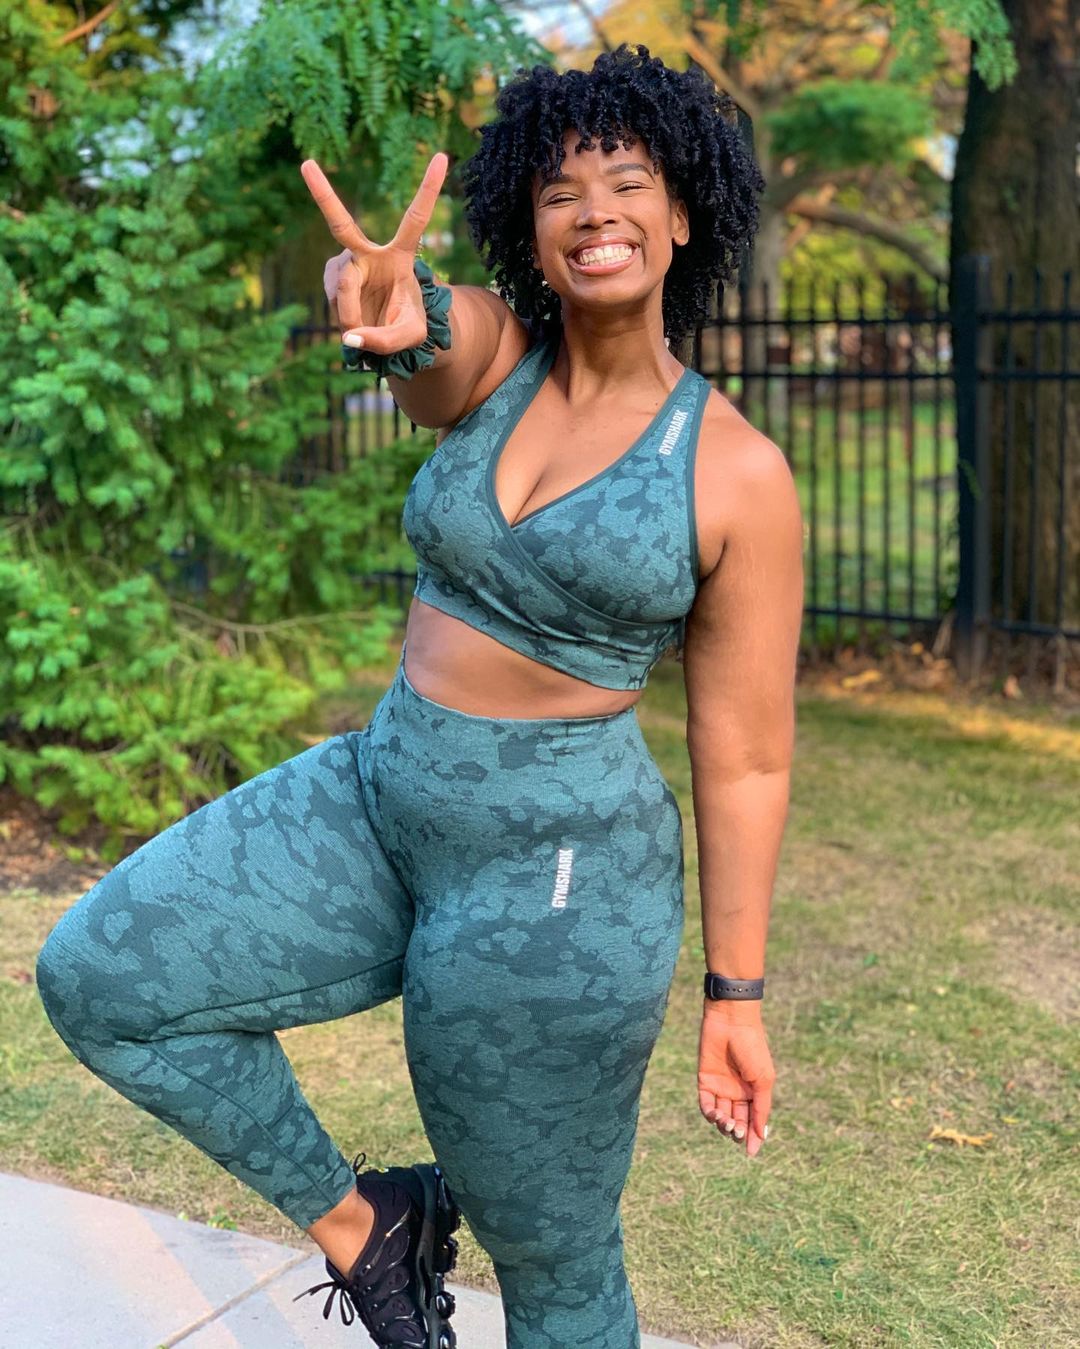 You Said It: The Fitness Influencers Who Are Inspiring You